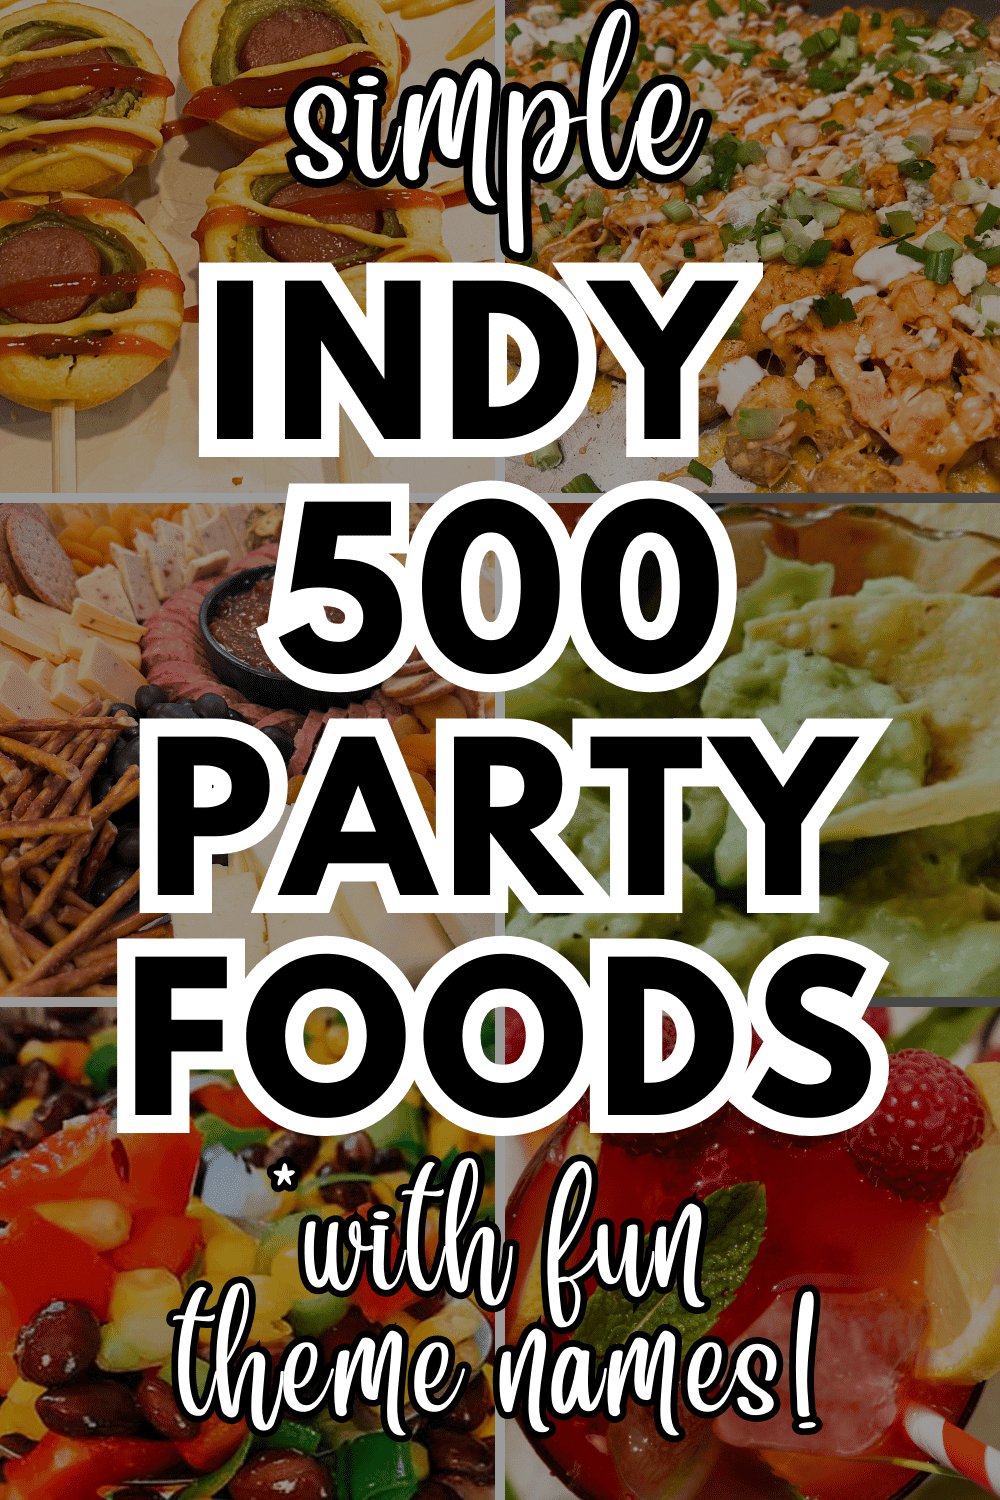 Easy Indy 500 Party Foods And Race Day Drinks For Kids And Adults - text over pictures of Indianapolis 500 party recipes